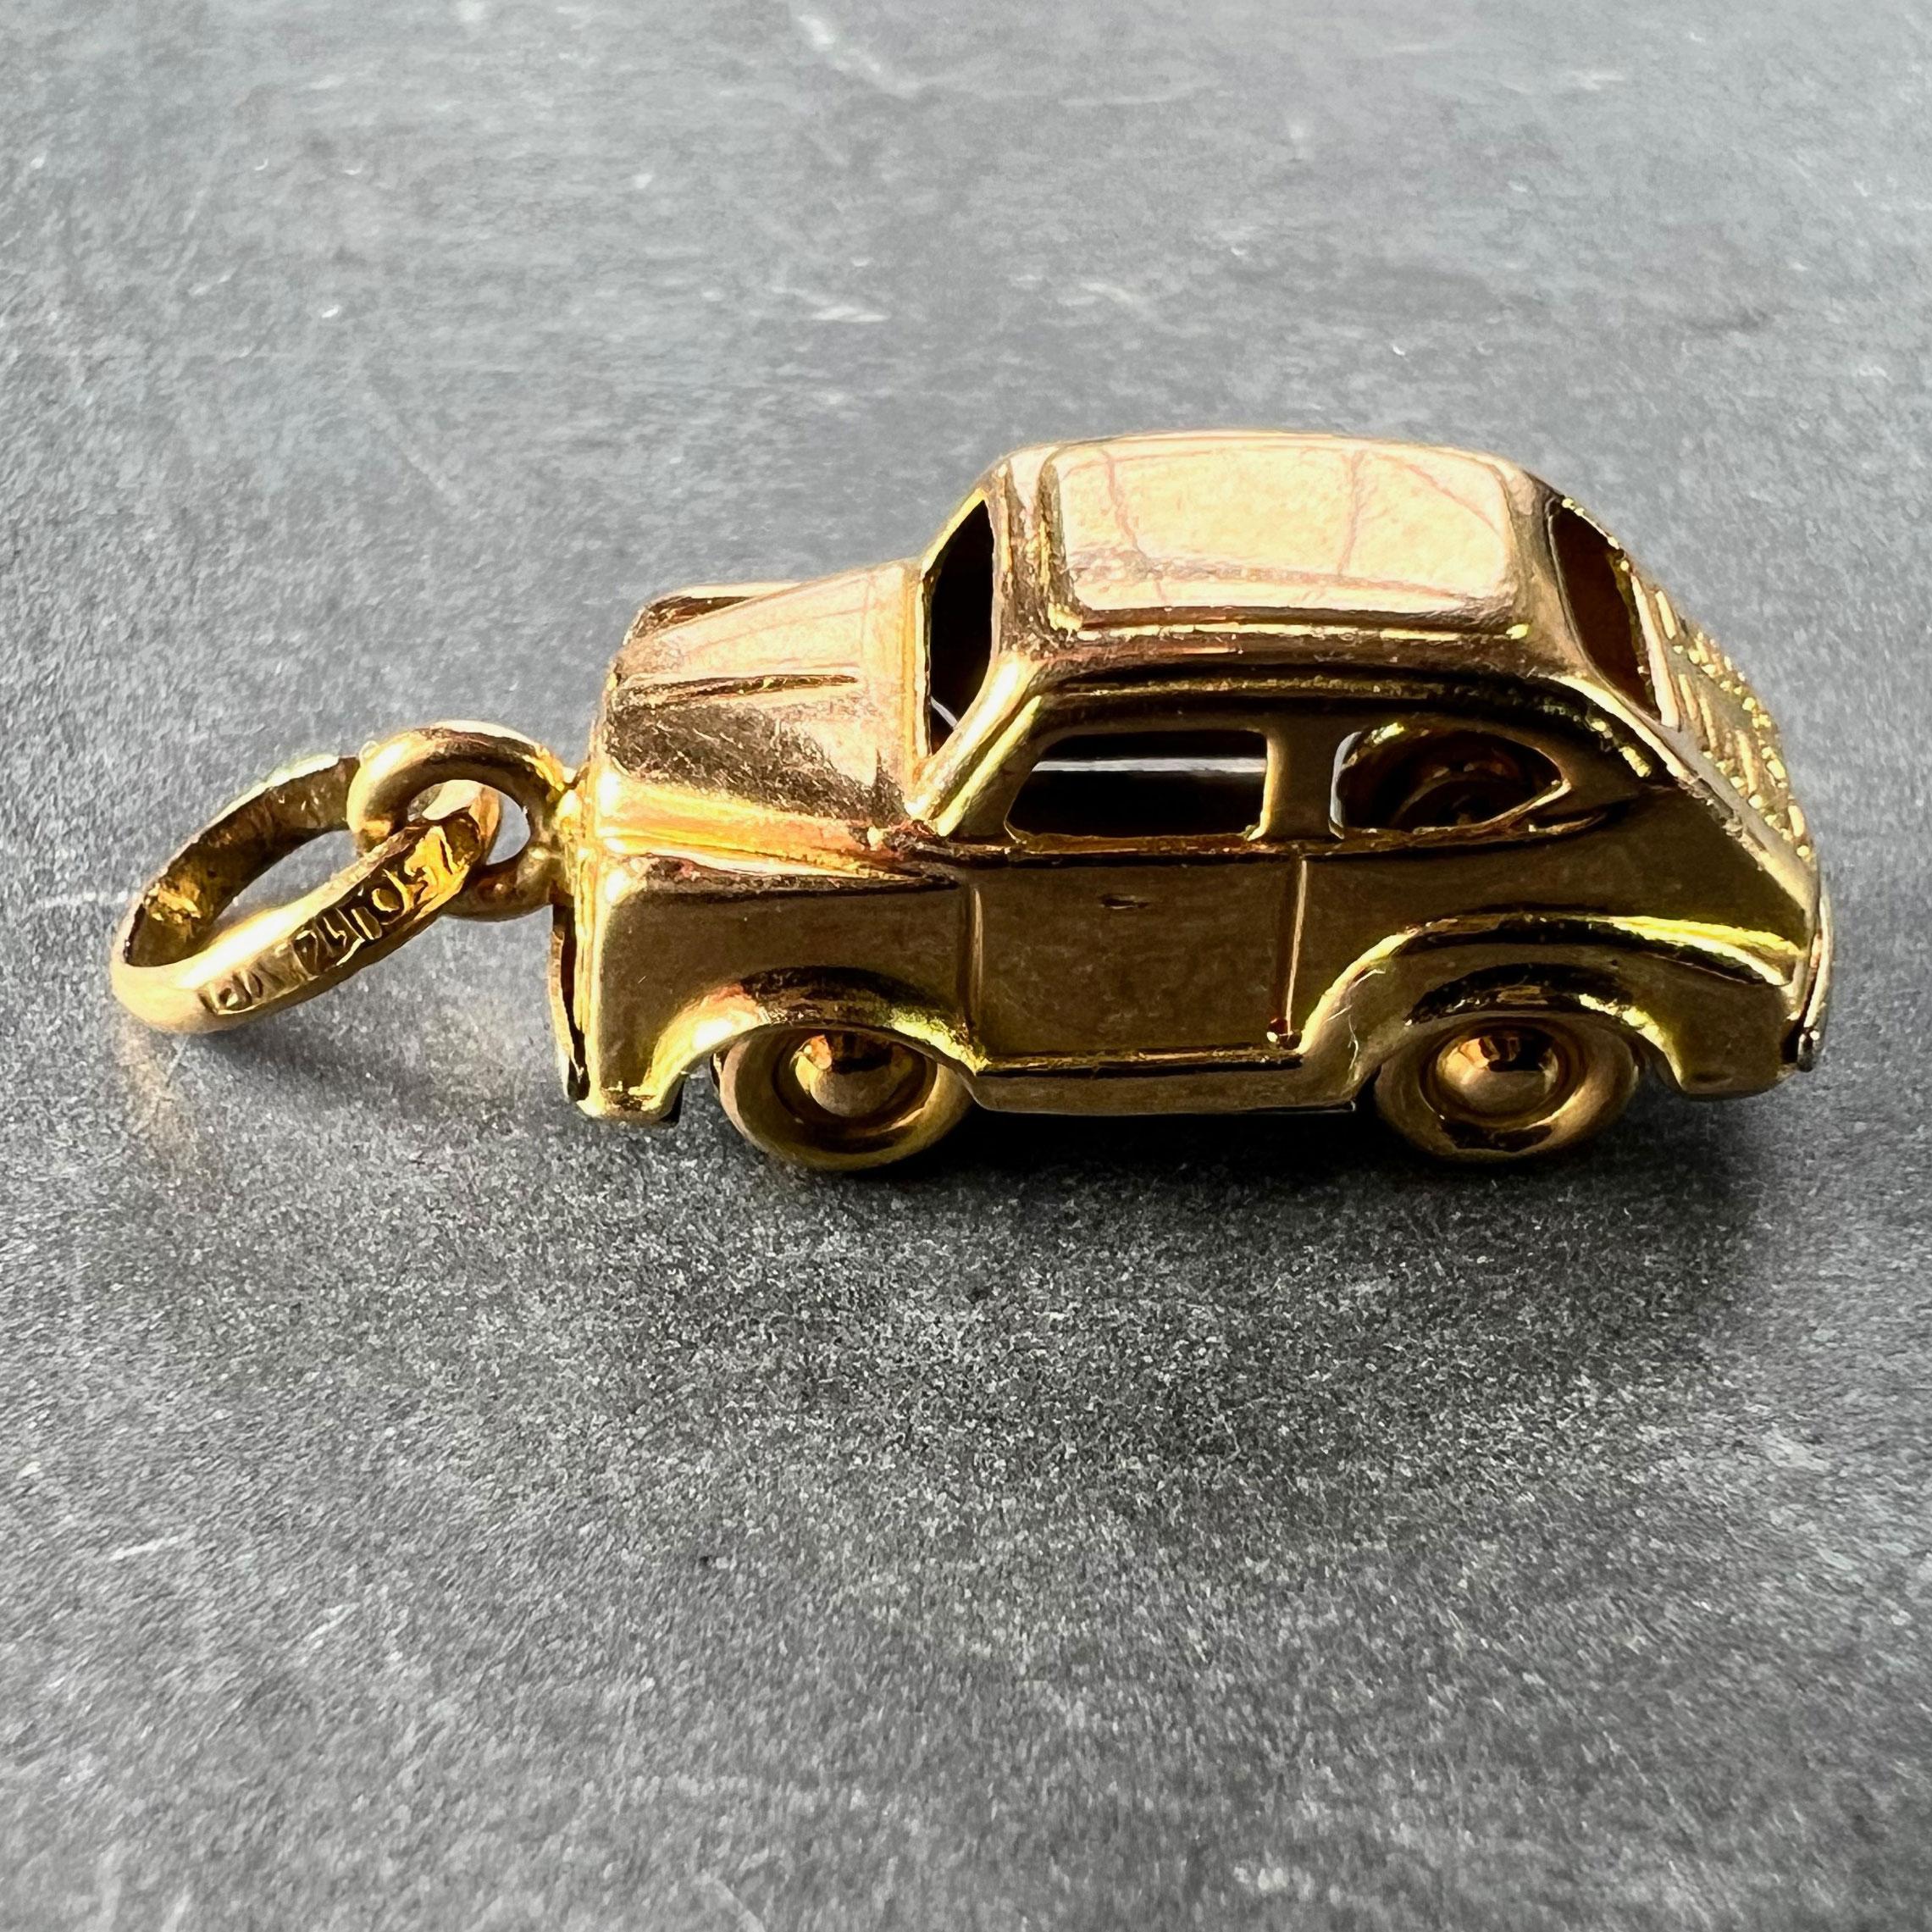 An Italian 18 karat (18K) yellow gold charm pendant designed as a saloon car with moving wheels. Stamped 18 for 18 karat gold to the base, the jump ring marked 750 for 18 karat gold and 14VA for Italian manufacture.

Dimensions: 2.2 x 0.8 x 0.9 cm